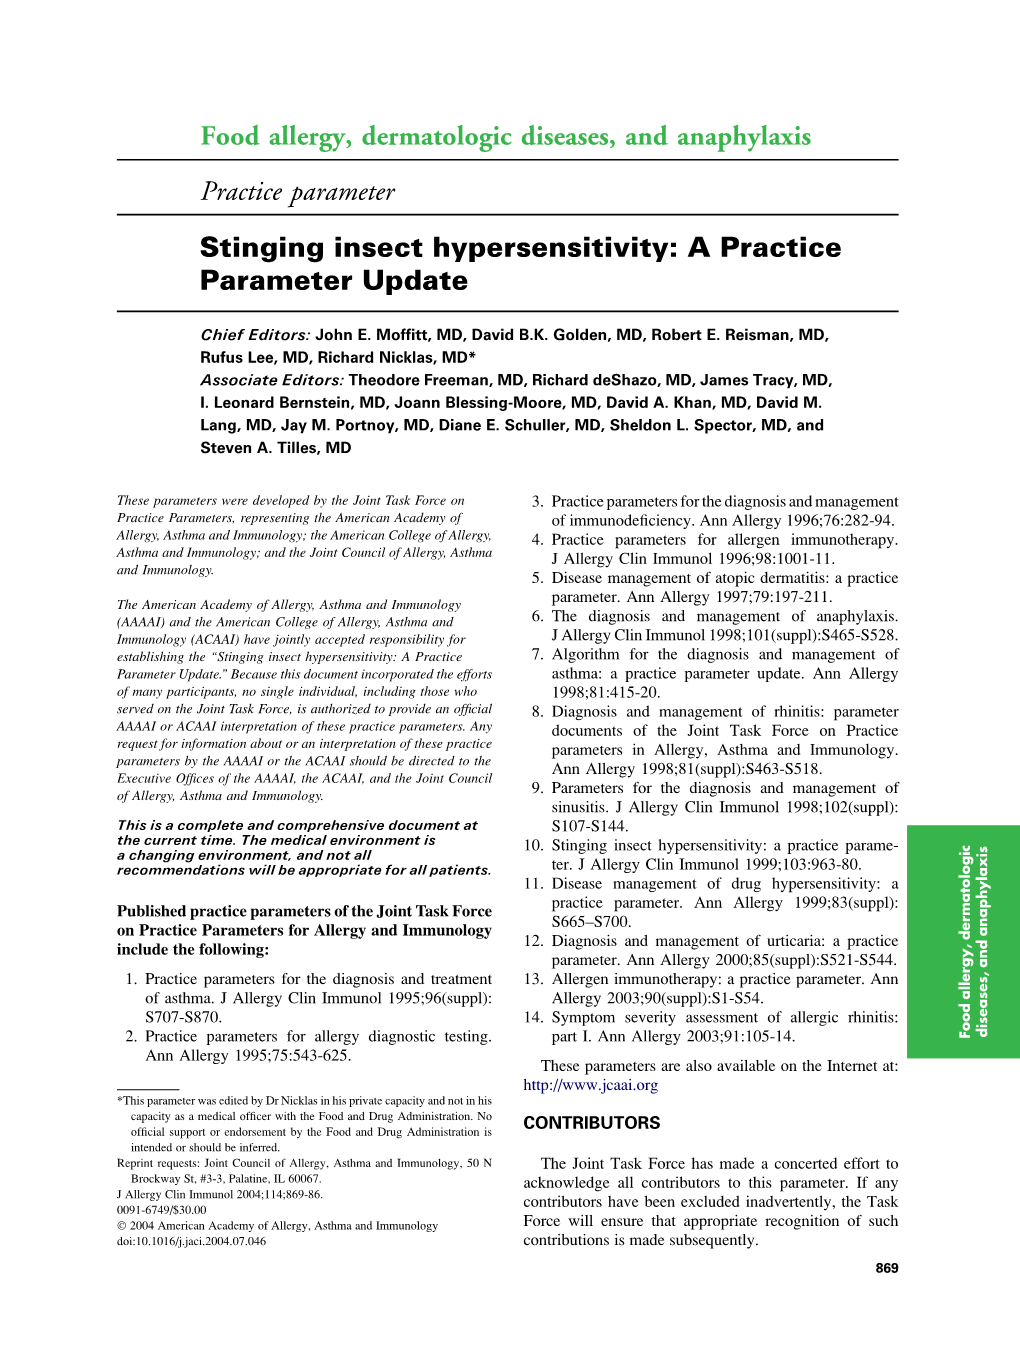 Practice Parameter Stinging Insect Hypersensitivity: a Practice Parameter Update